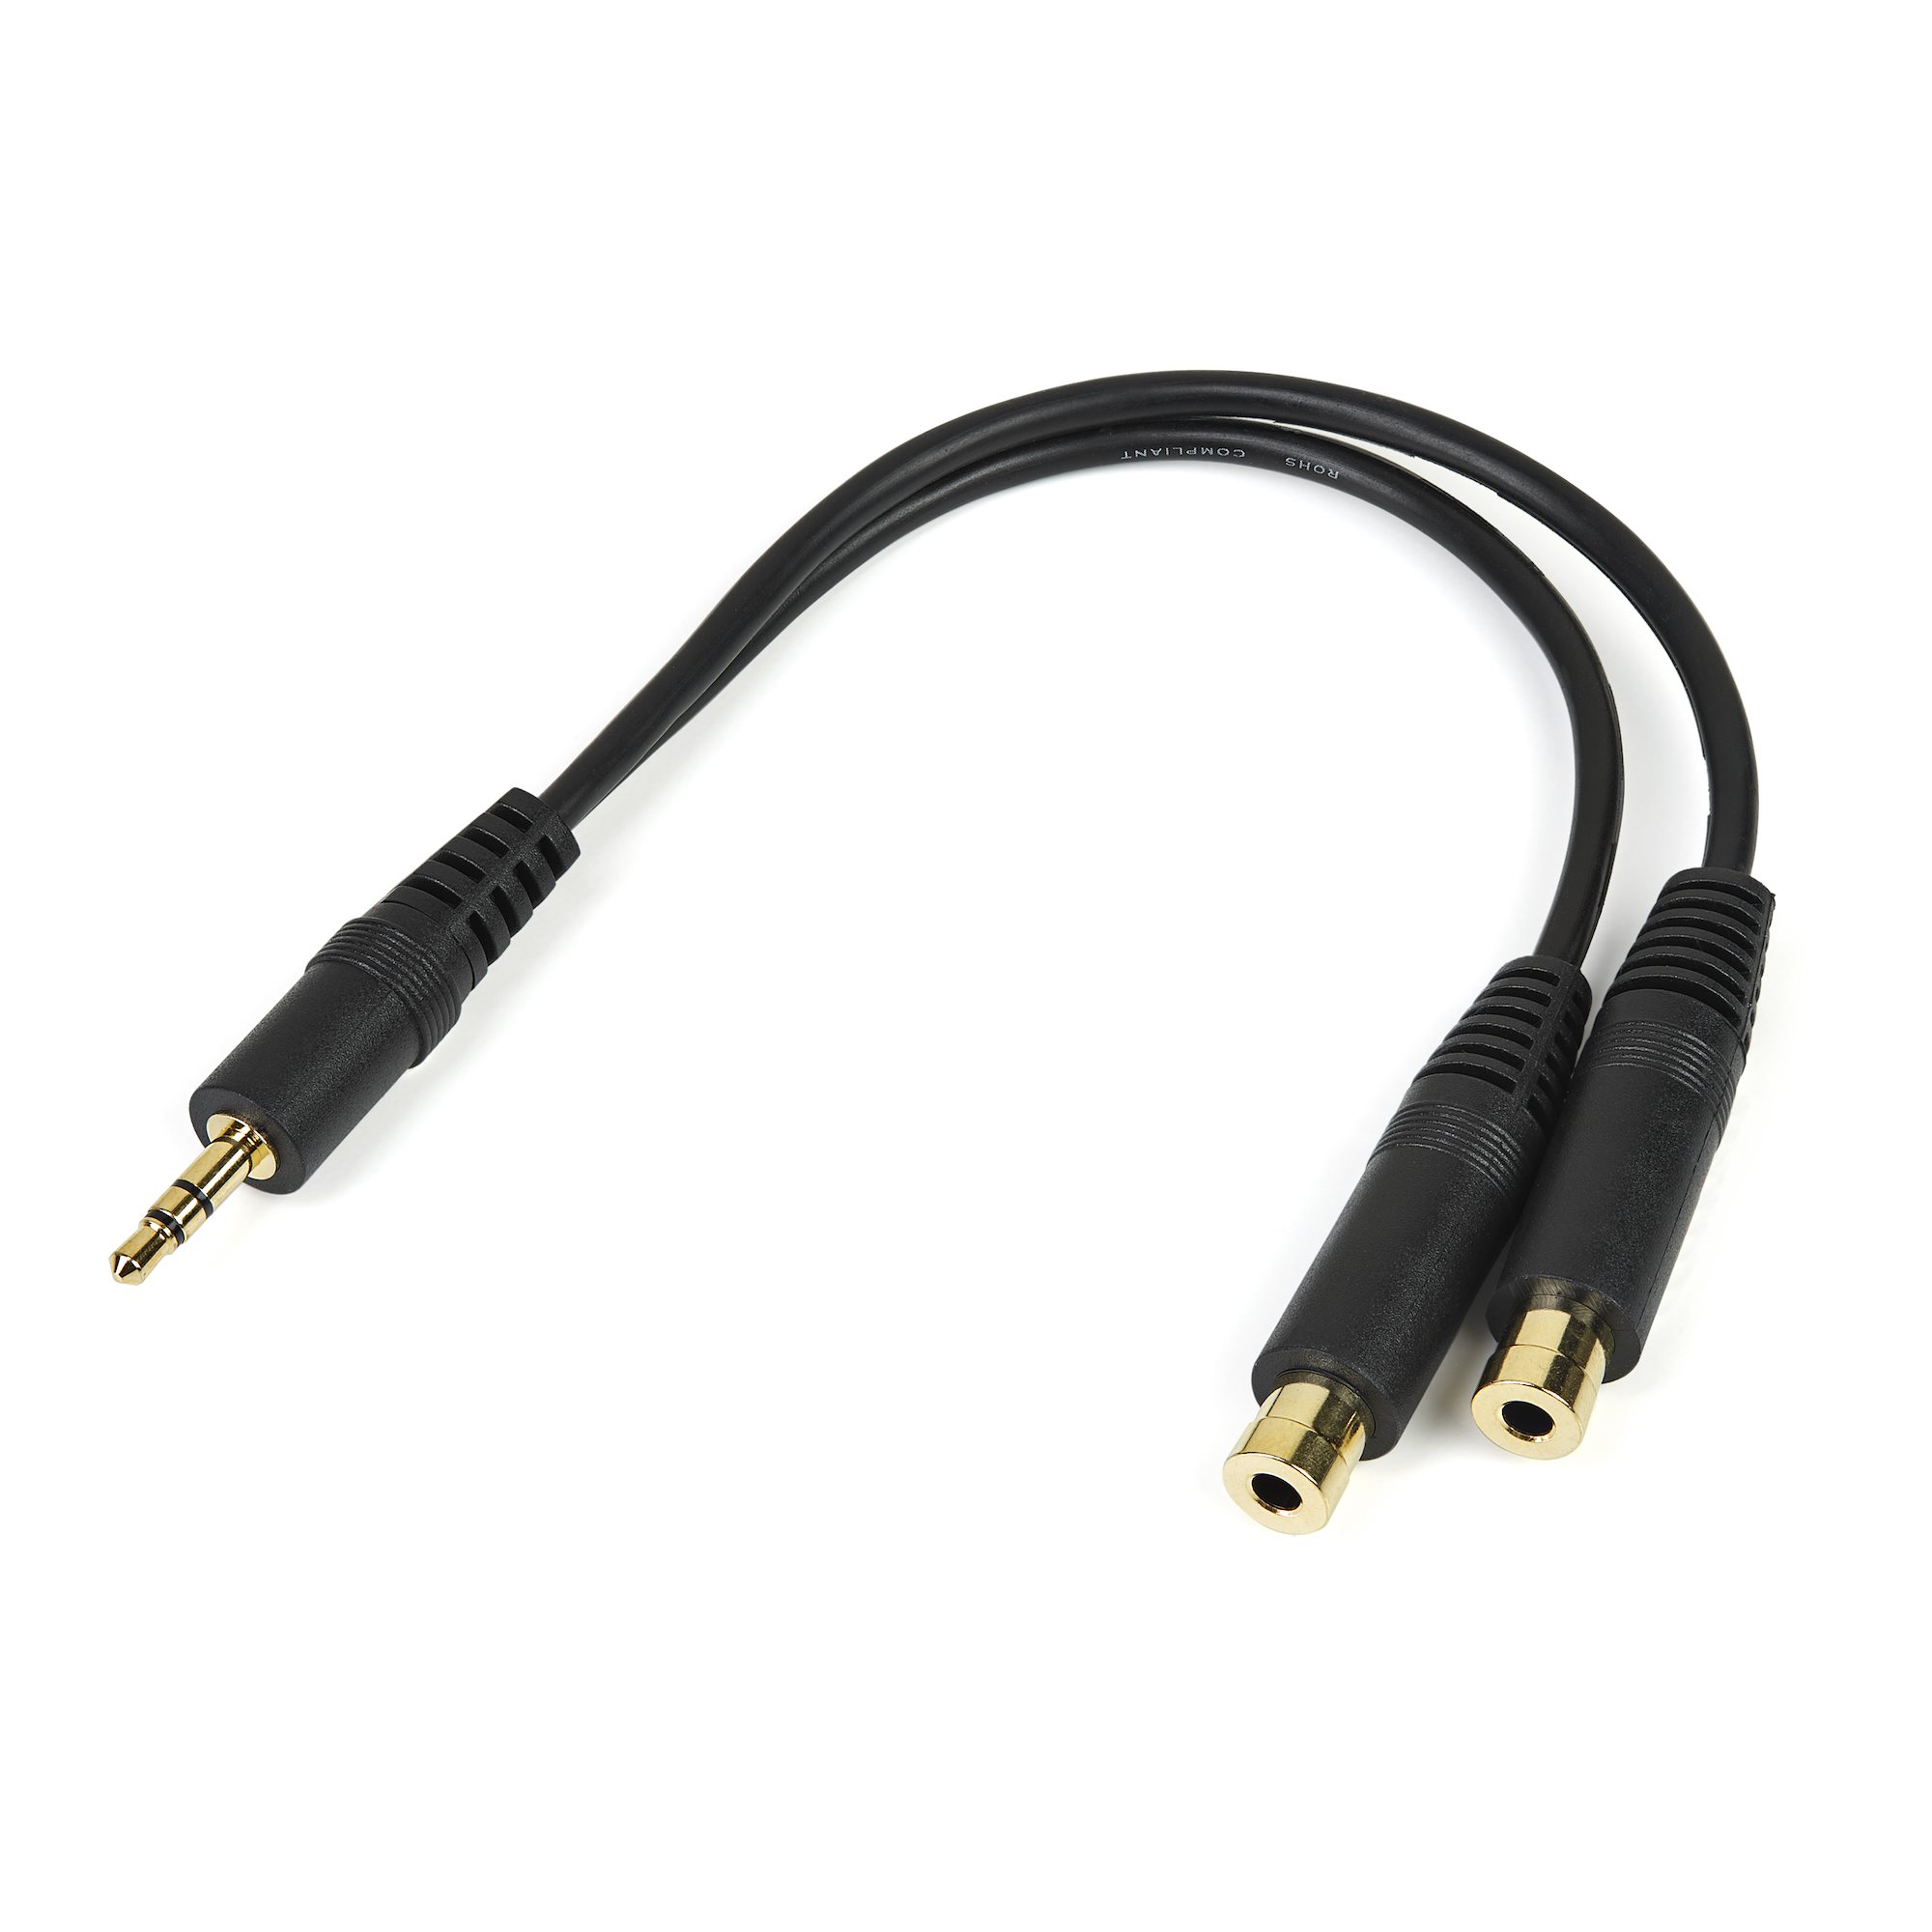 StarTech.com MUY1MFFS 3.5mm Male to 2 x 3.5mm Female Slim Stereo Splitter Cable 